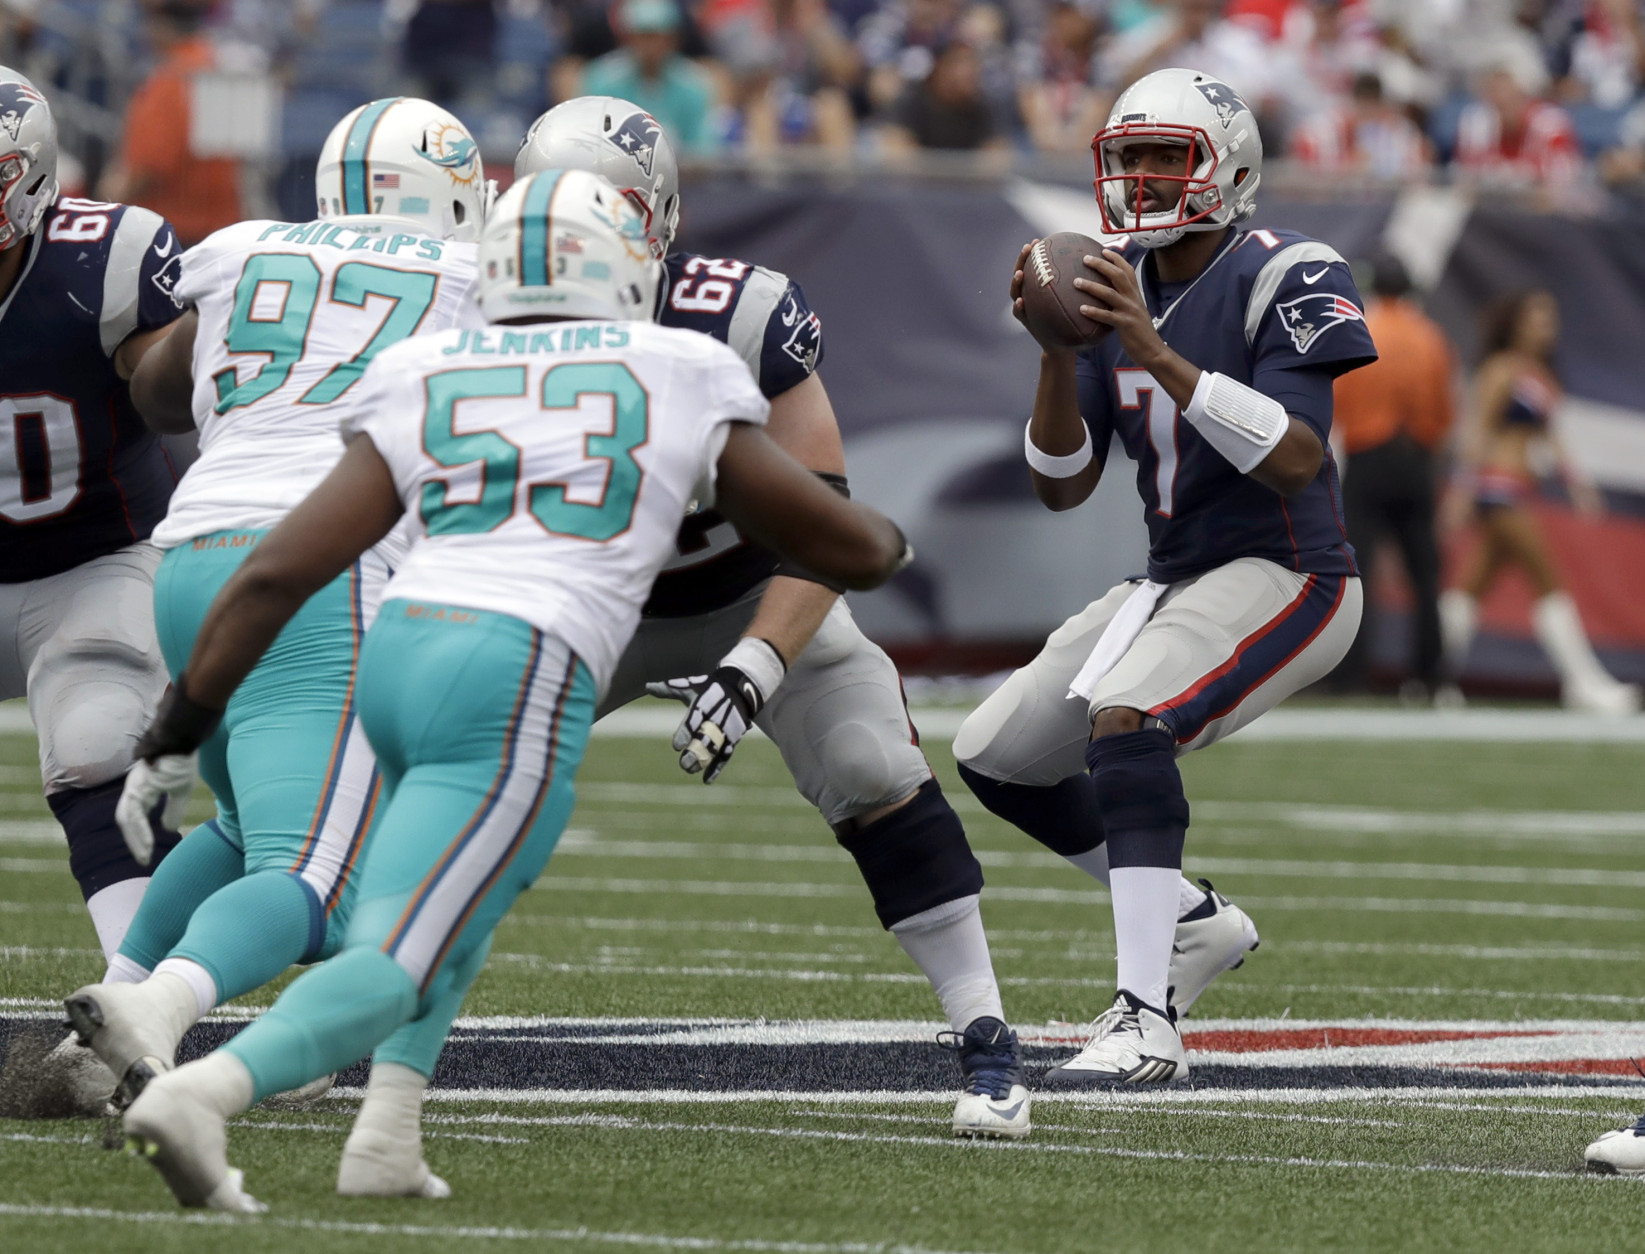 New England Patriots quarterback Jacoby Brissett (7) drops back to pass as Miami Dolphins defensive tackle Jordan Phillips (97) and linebacker Jelani Jenkins (53) rush during the first half of an NFL football game Sunday, Sept. 18, 2016, in Foxborough, Mass. (AP Photo/Charles Krupa)